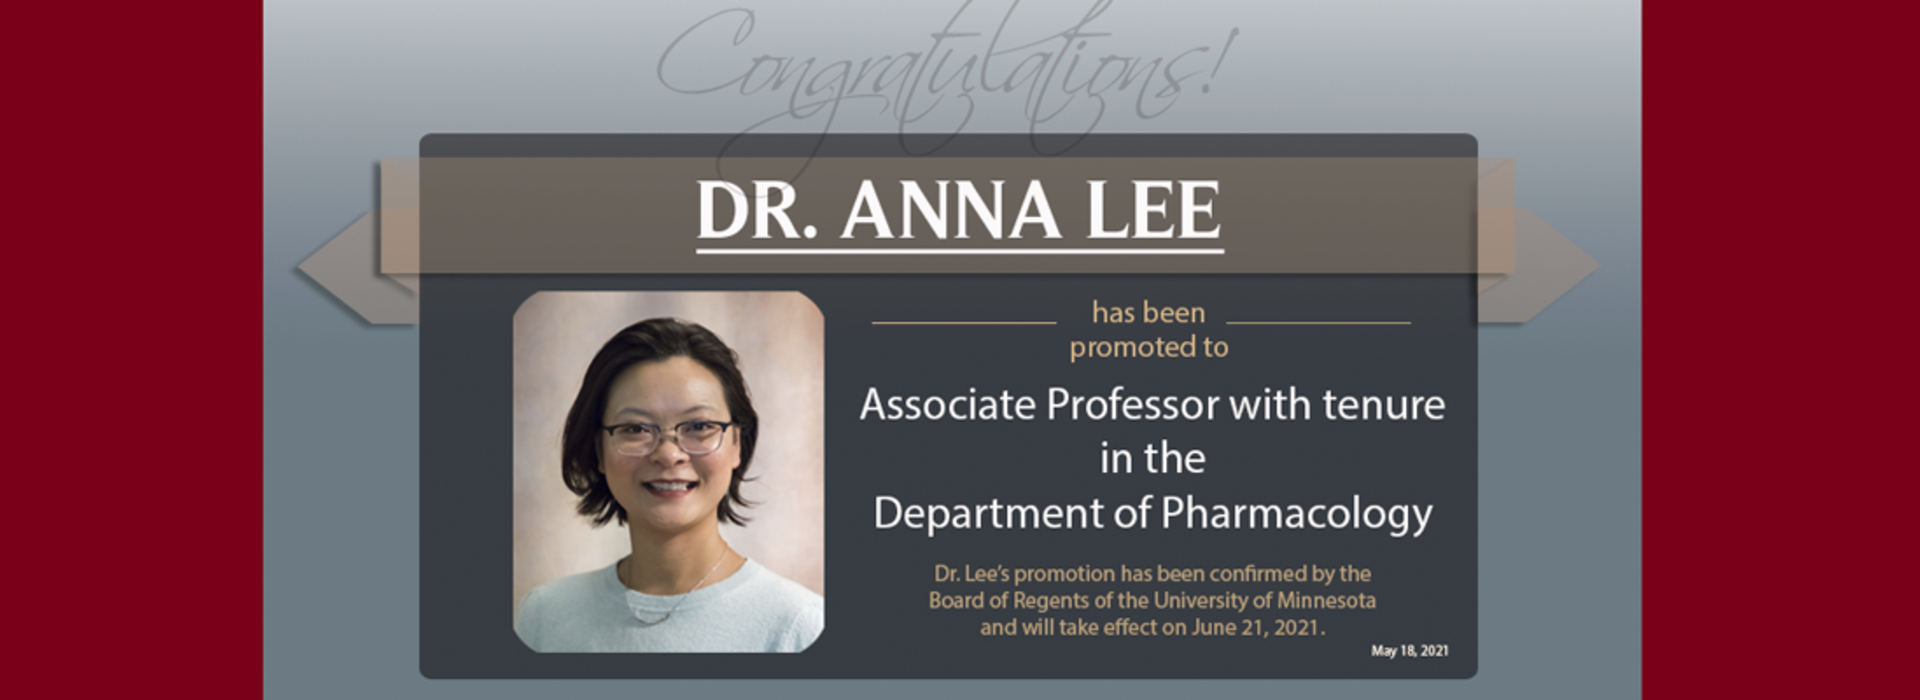 Portrait of Dr. Anna Lee with congratulatory text